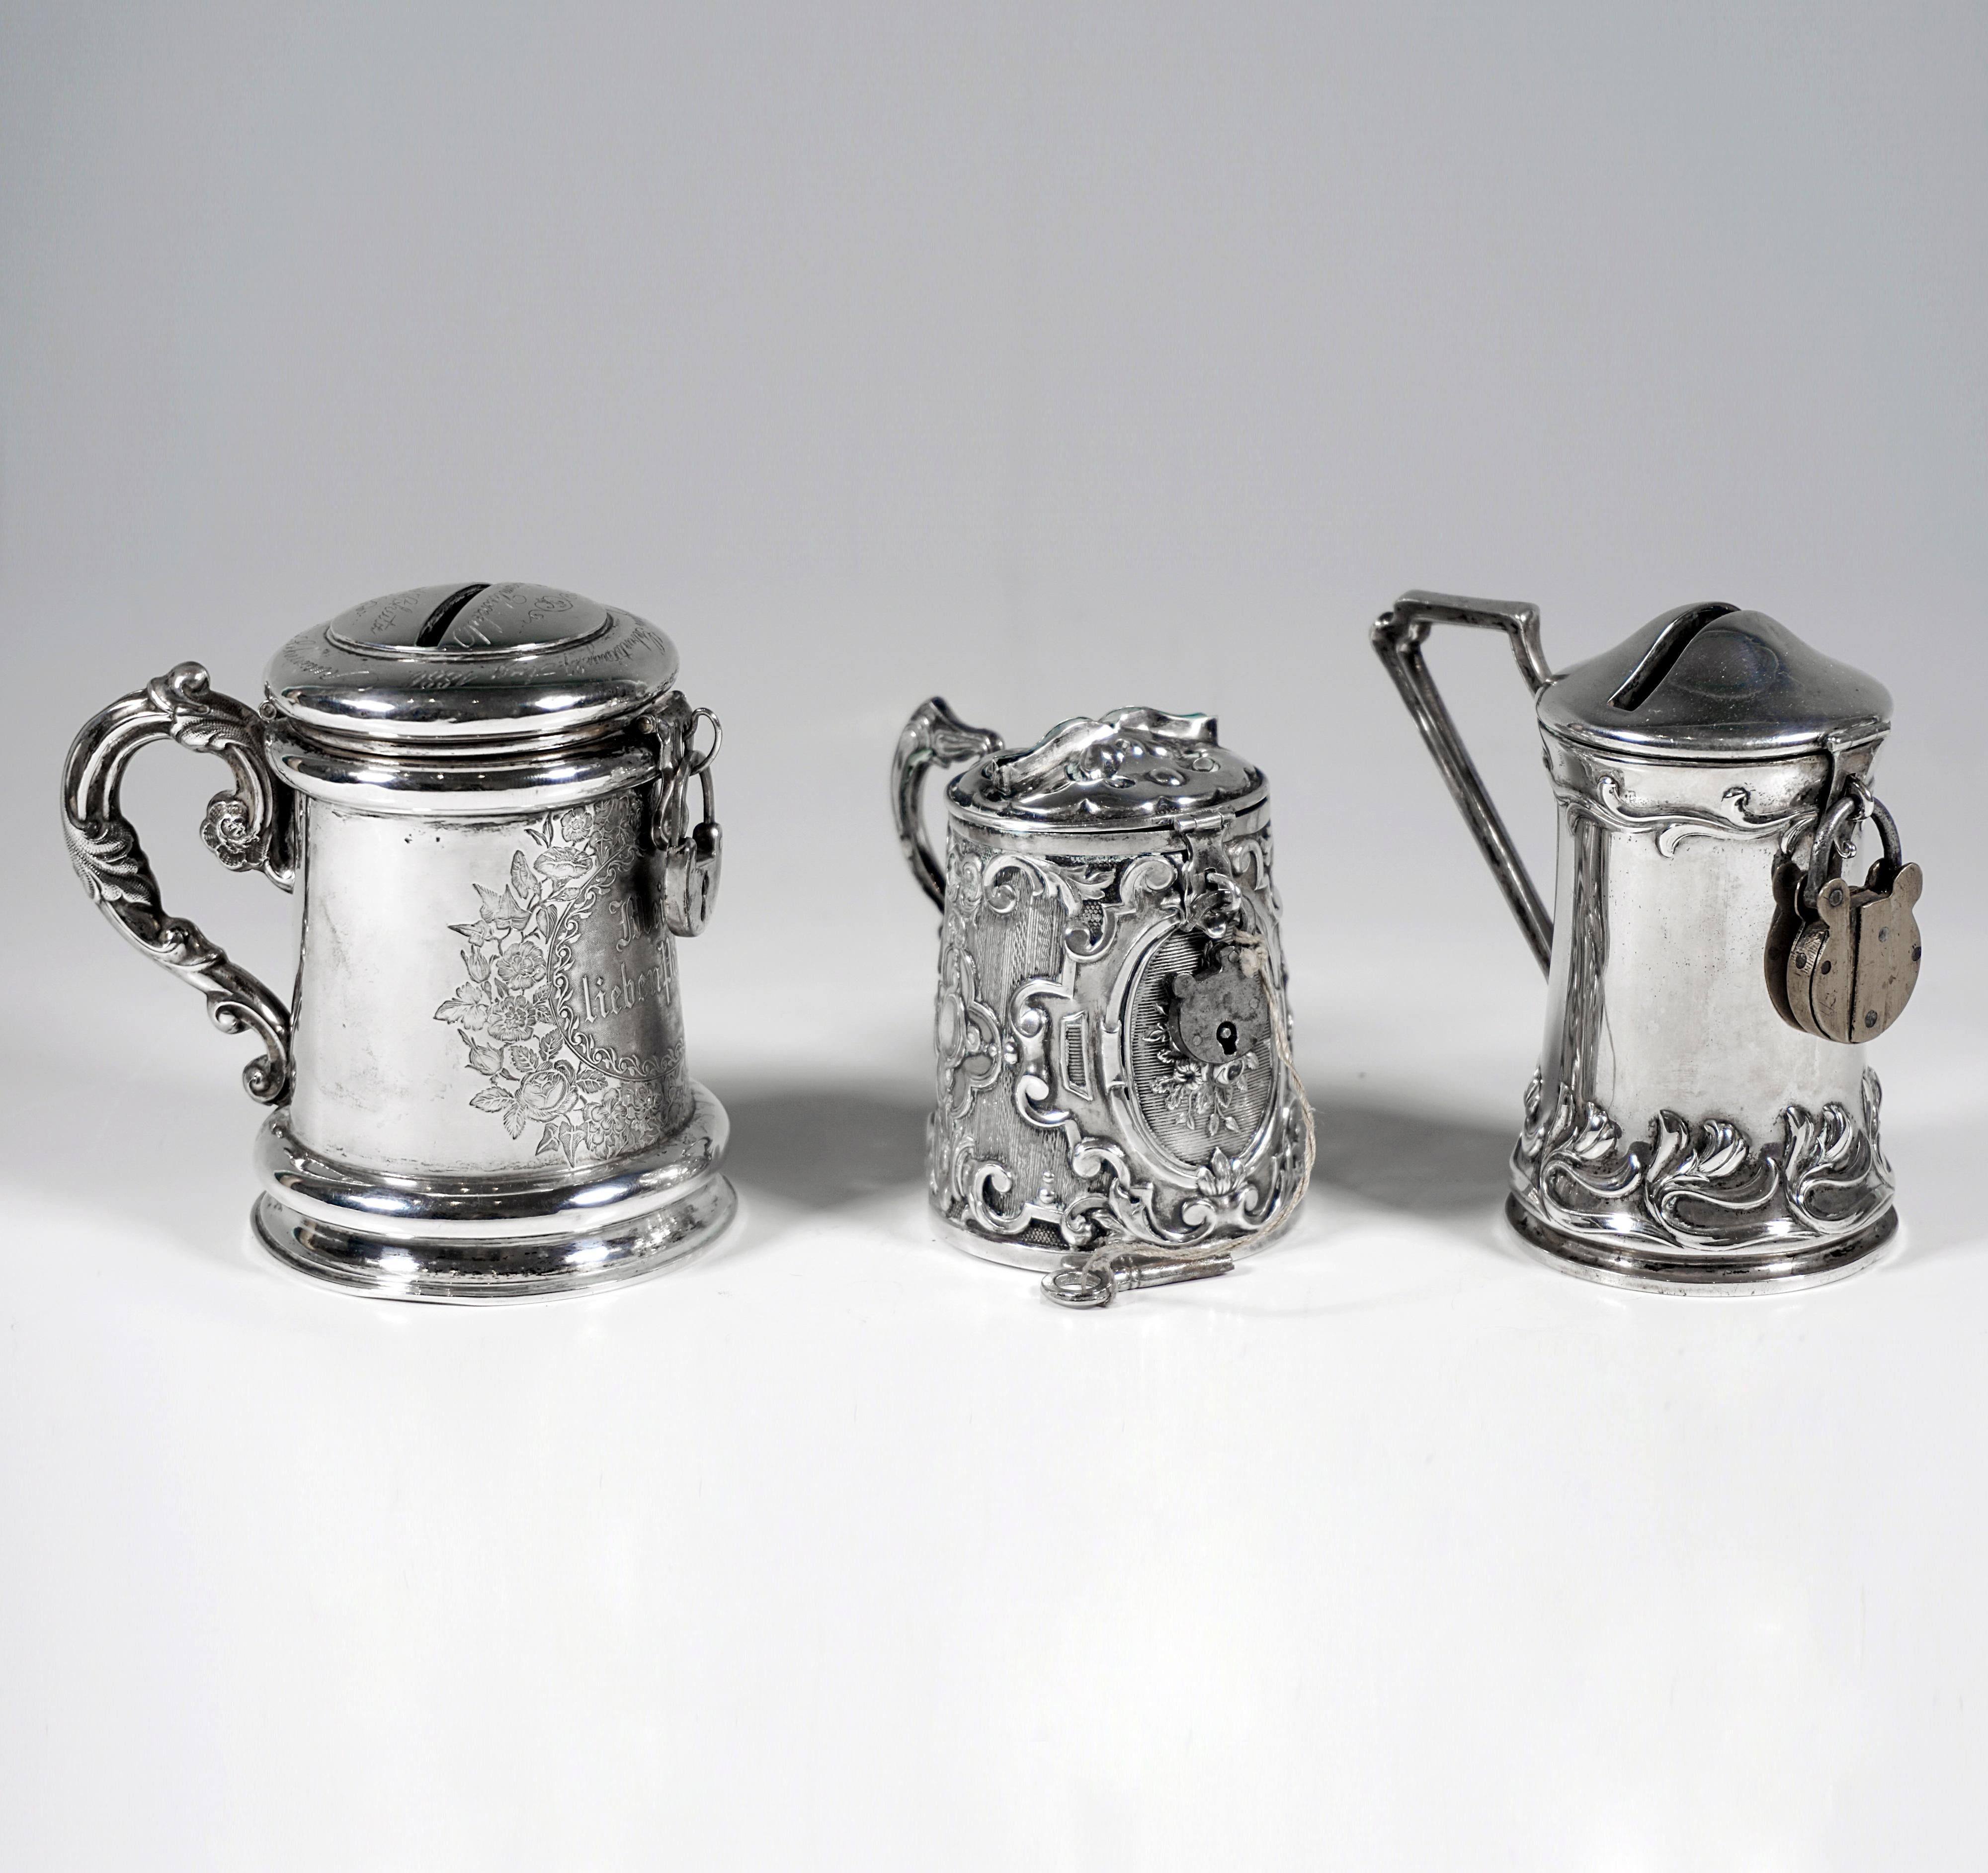 Three silver money boxes in the shape of a tankard, handle, hinged lid, all boxes with locks, 1 key present.

Dating:           19th Century
Material:         Silver '800' & 13 Lot ('812.5')
Total weight:  ca 230 grams / 8.09 oz / 7.39 troy